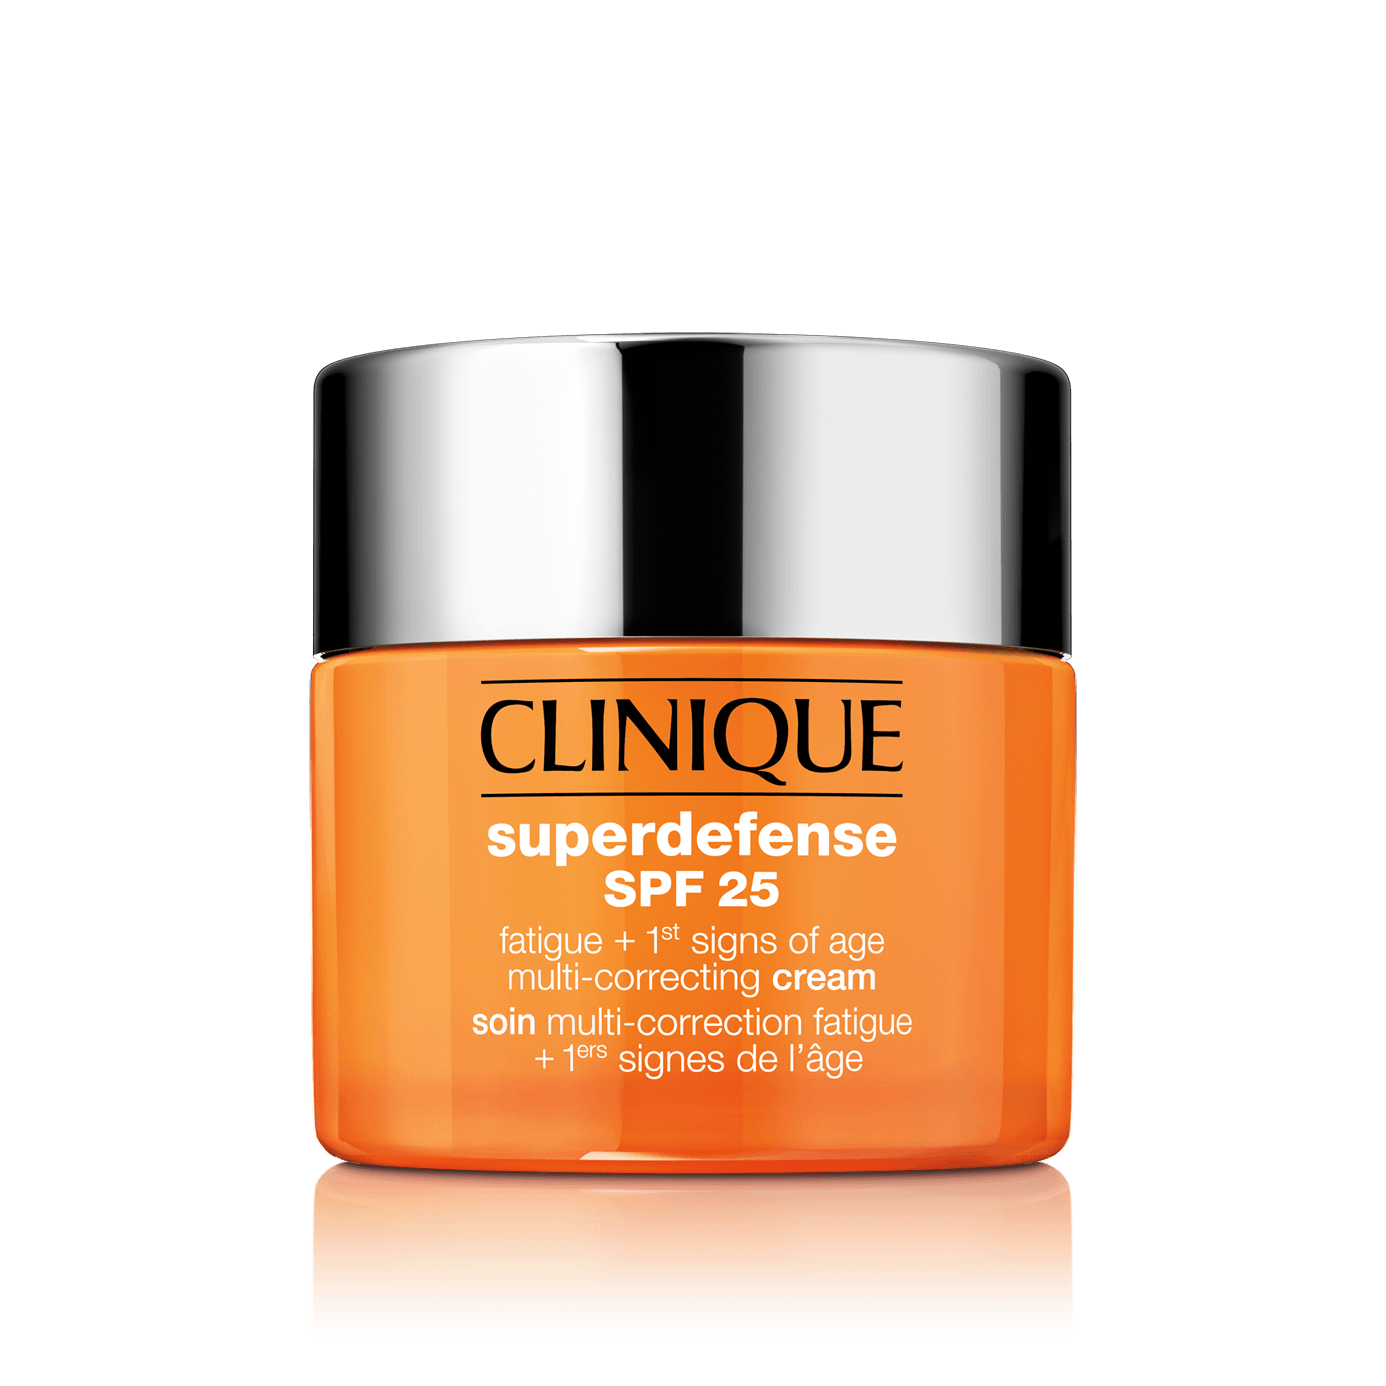 Clinique Superdefense™ SPF 25 Fatigue + 1st Signs Of Age Multi-Correcting Cream - Very Dry to Dry & Dry Combination